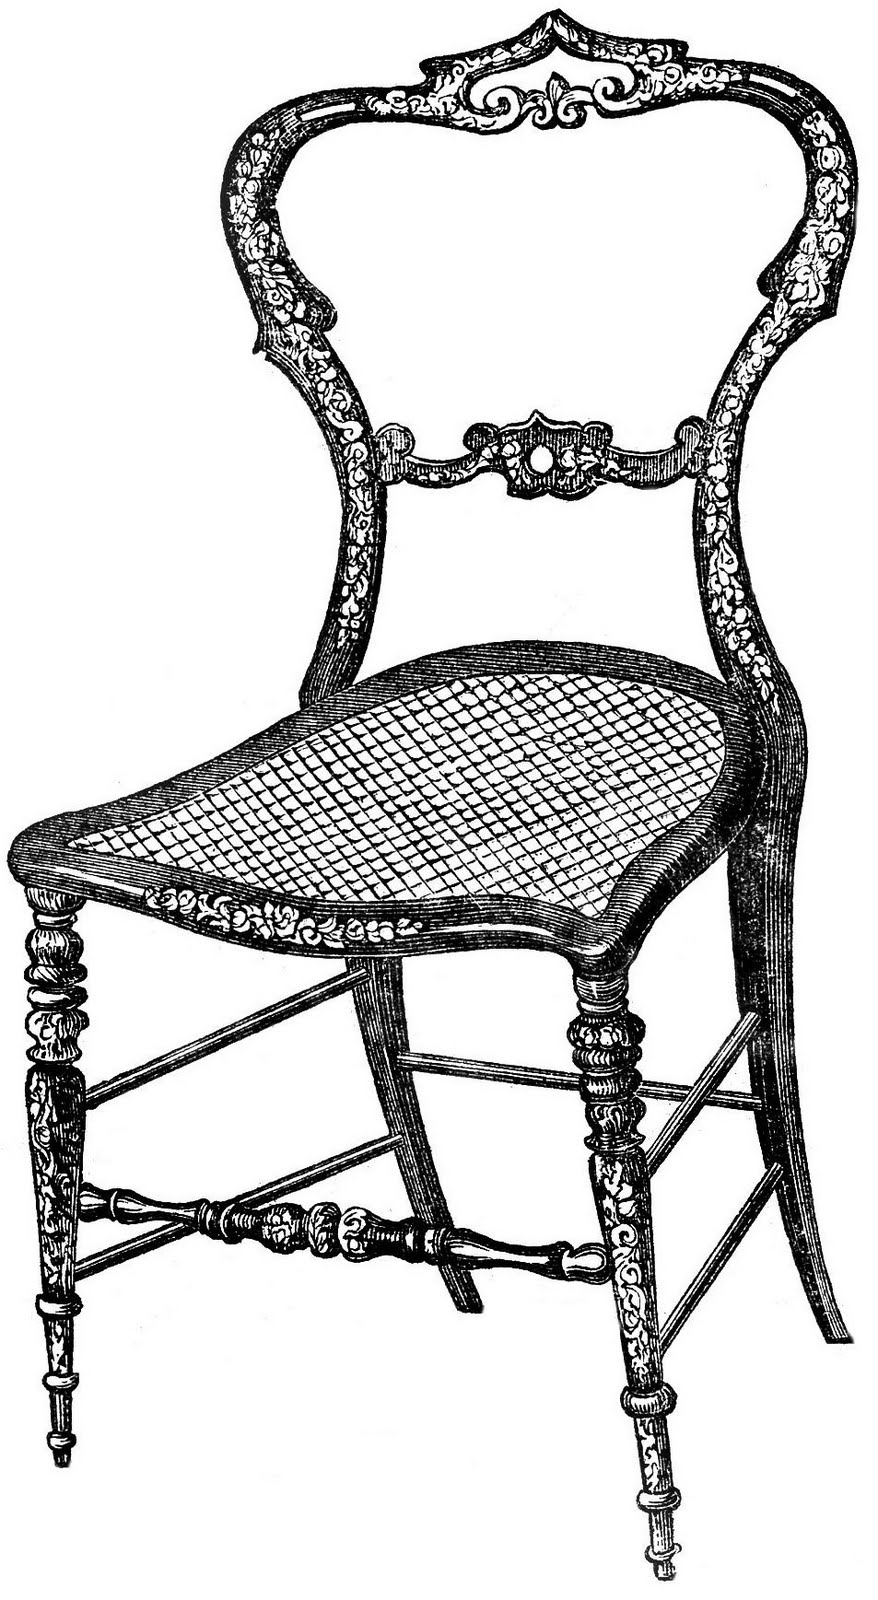 Pix For > Rocking Chair Clip Art Black And White